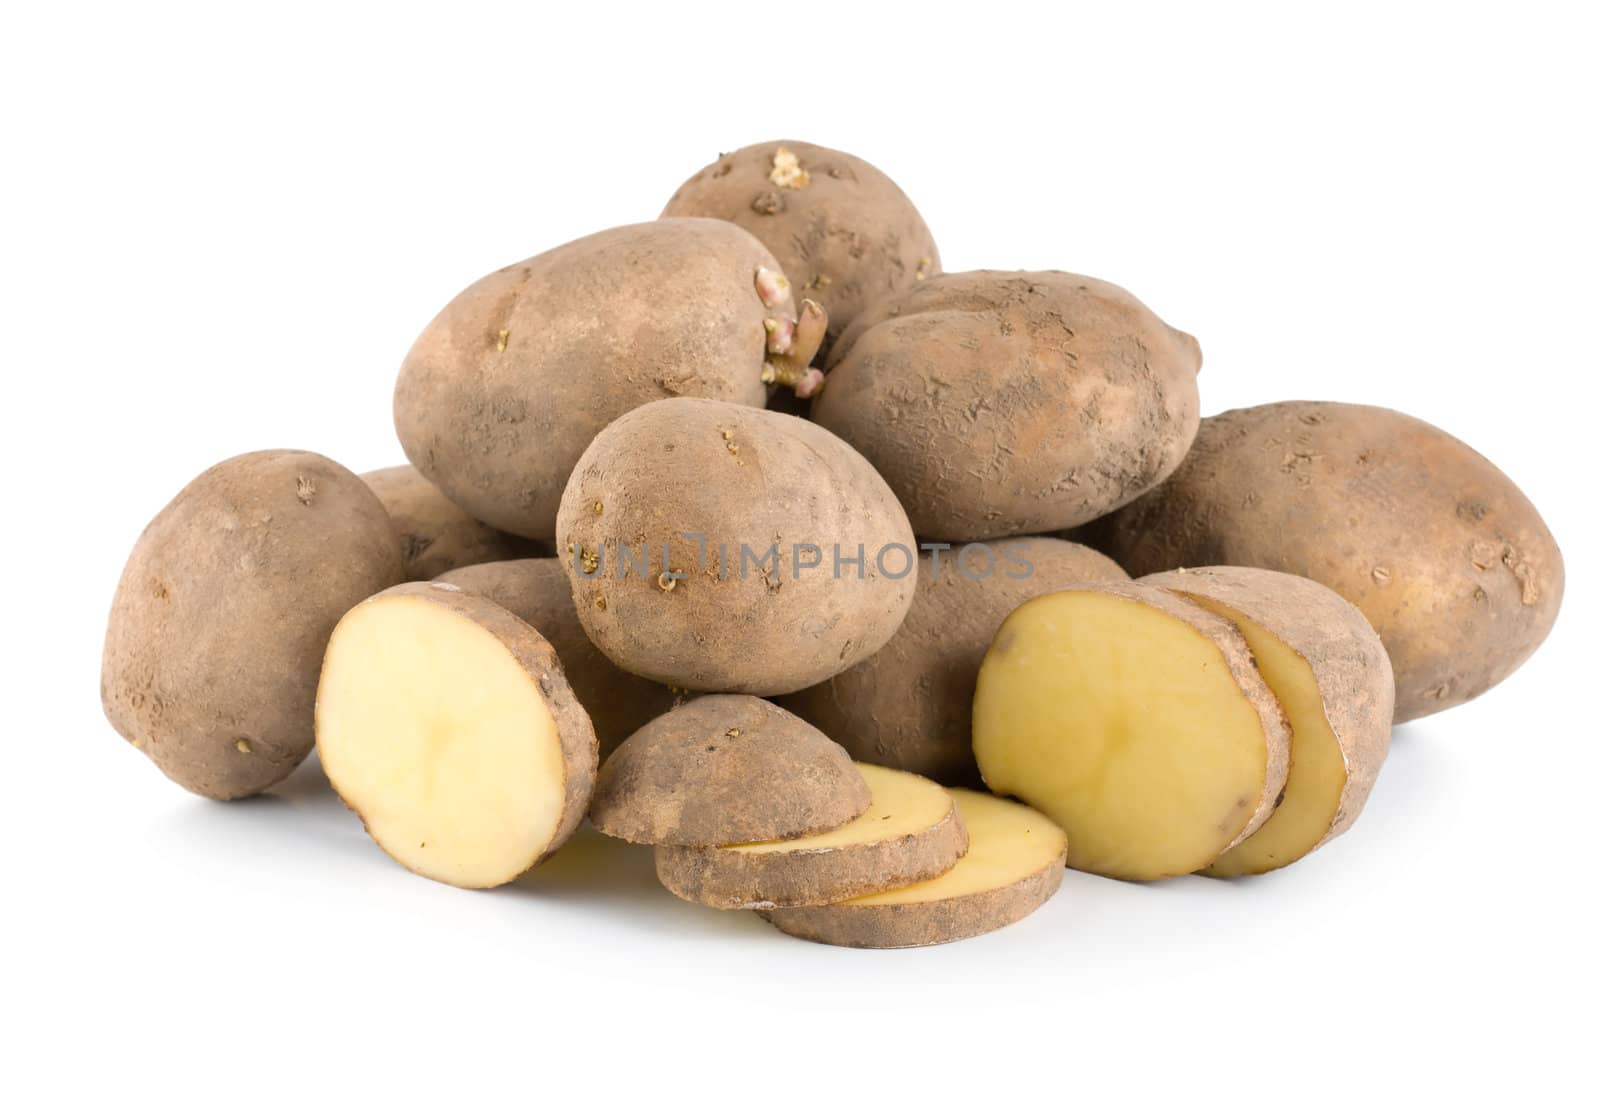 Pile of potatoes isolated on a white background